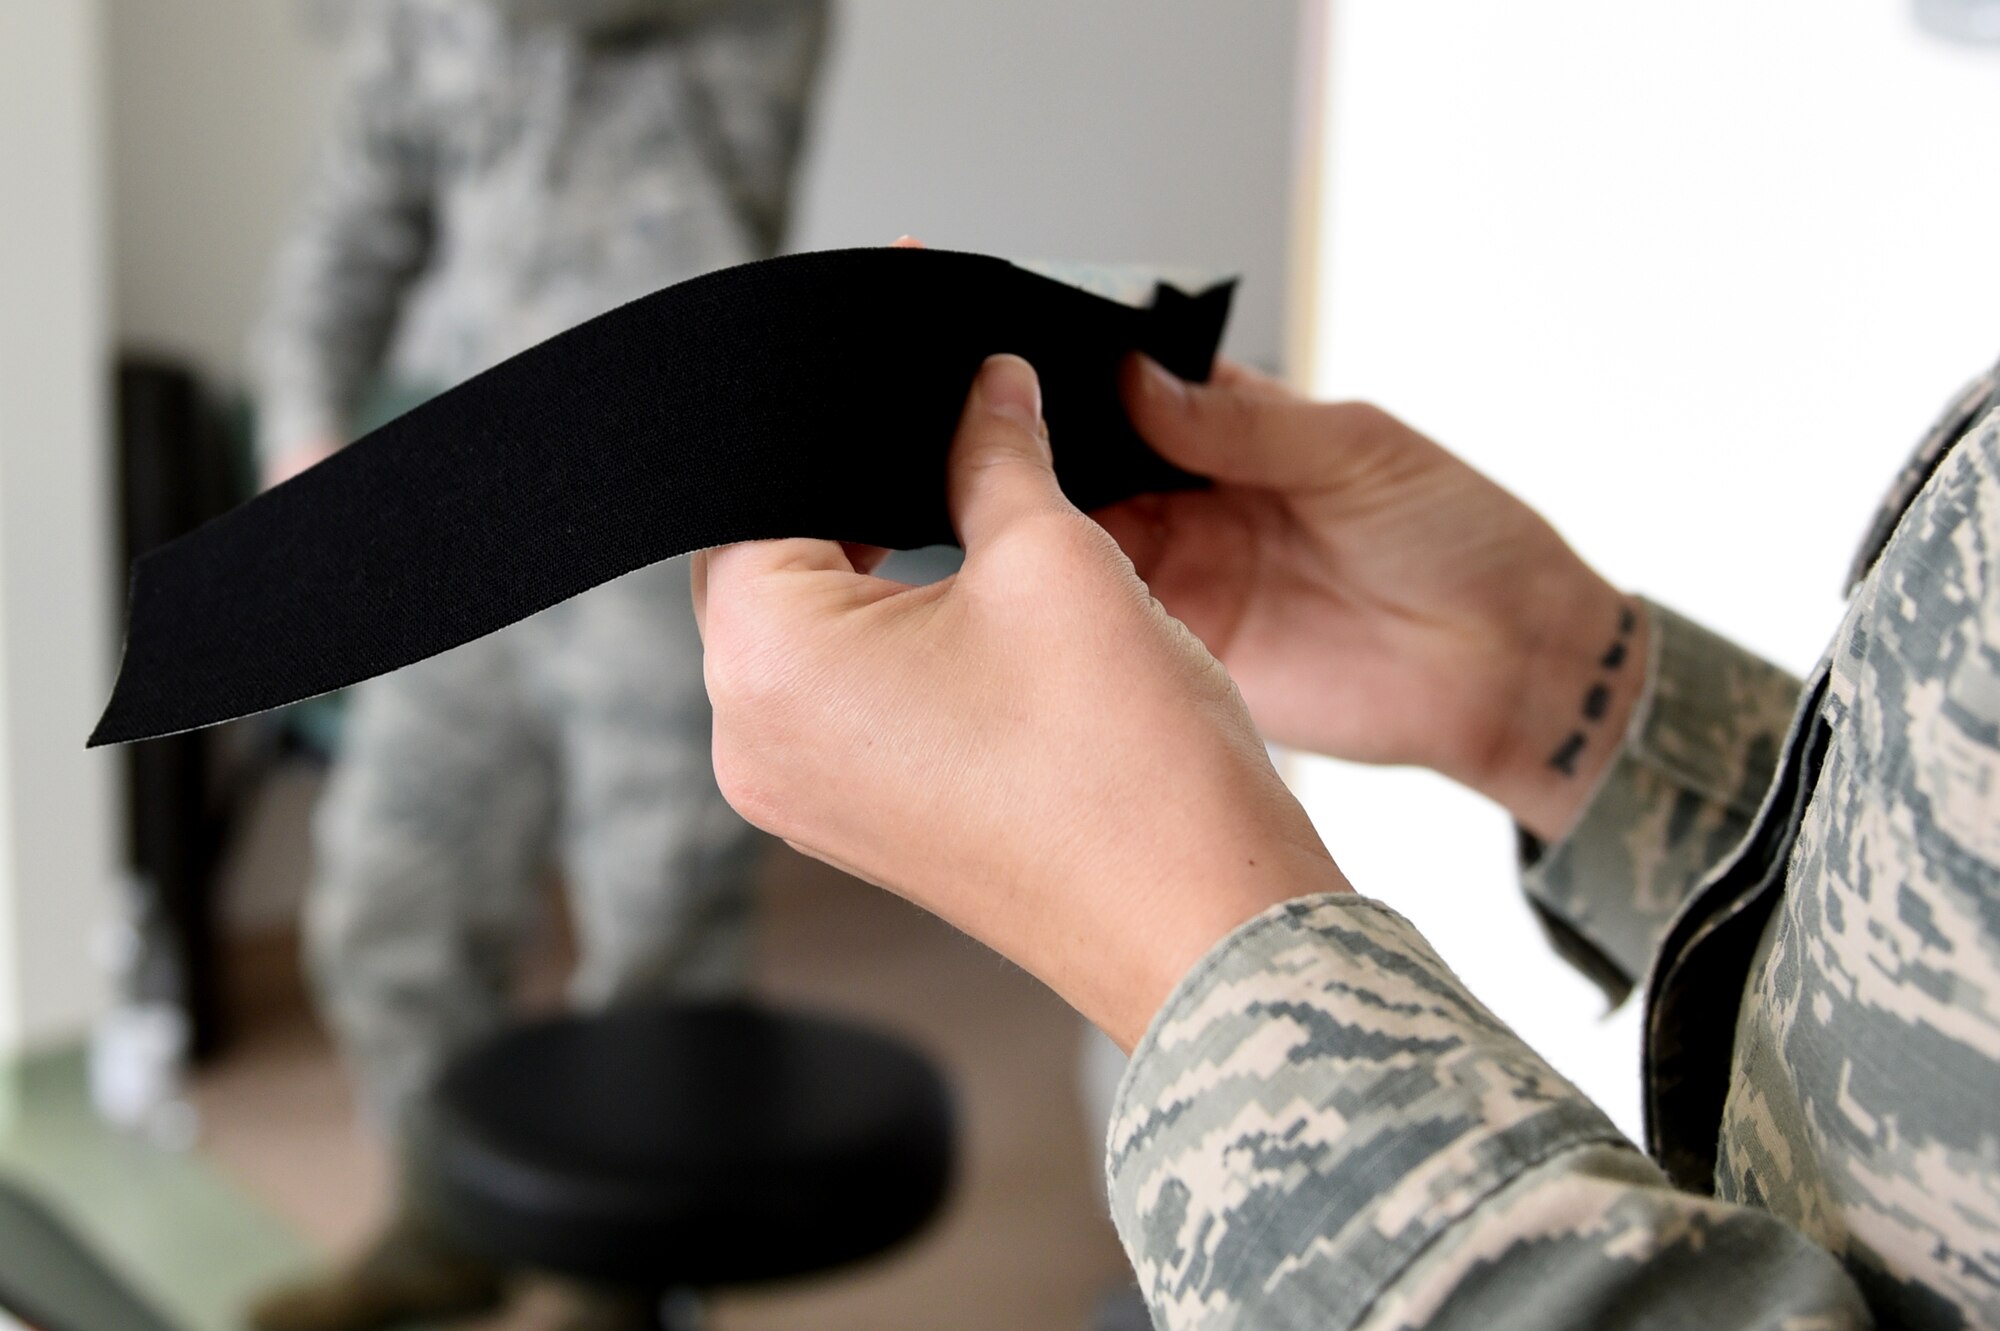 Students test the elasticity of kinesio tape during the recent medical group training day at Spangdahlem Air Base, Germany, April 21, 2017. Kinesio taping is a procedure intended to decrease pain and inflammation, stimulate blood and lymph circulation, aid postural correction, enhance athletic performance and prevent musculoskeletal injuries. (U.S. Air Force photo by Tech. Sgt. Staci Miller)